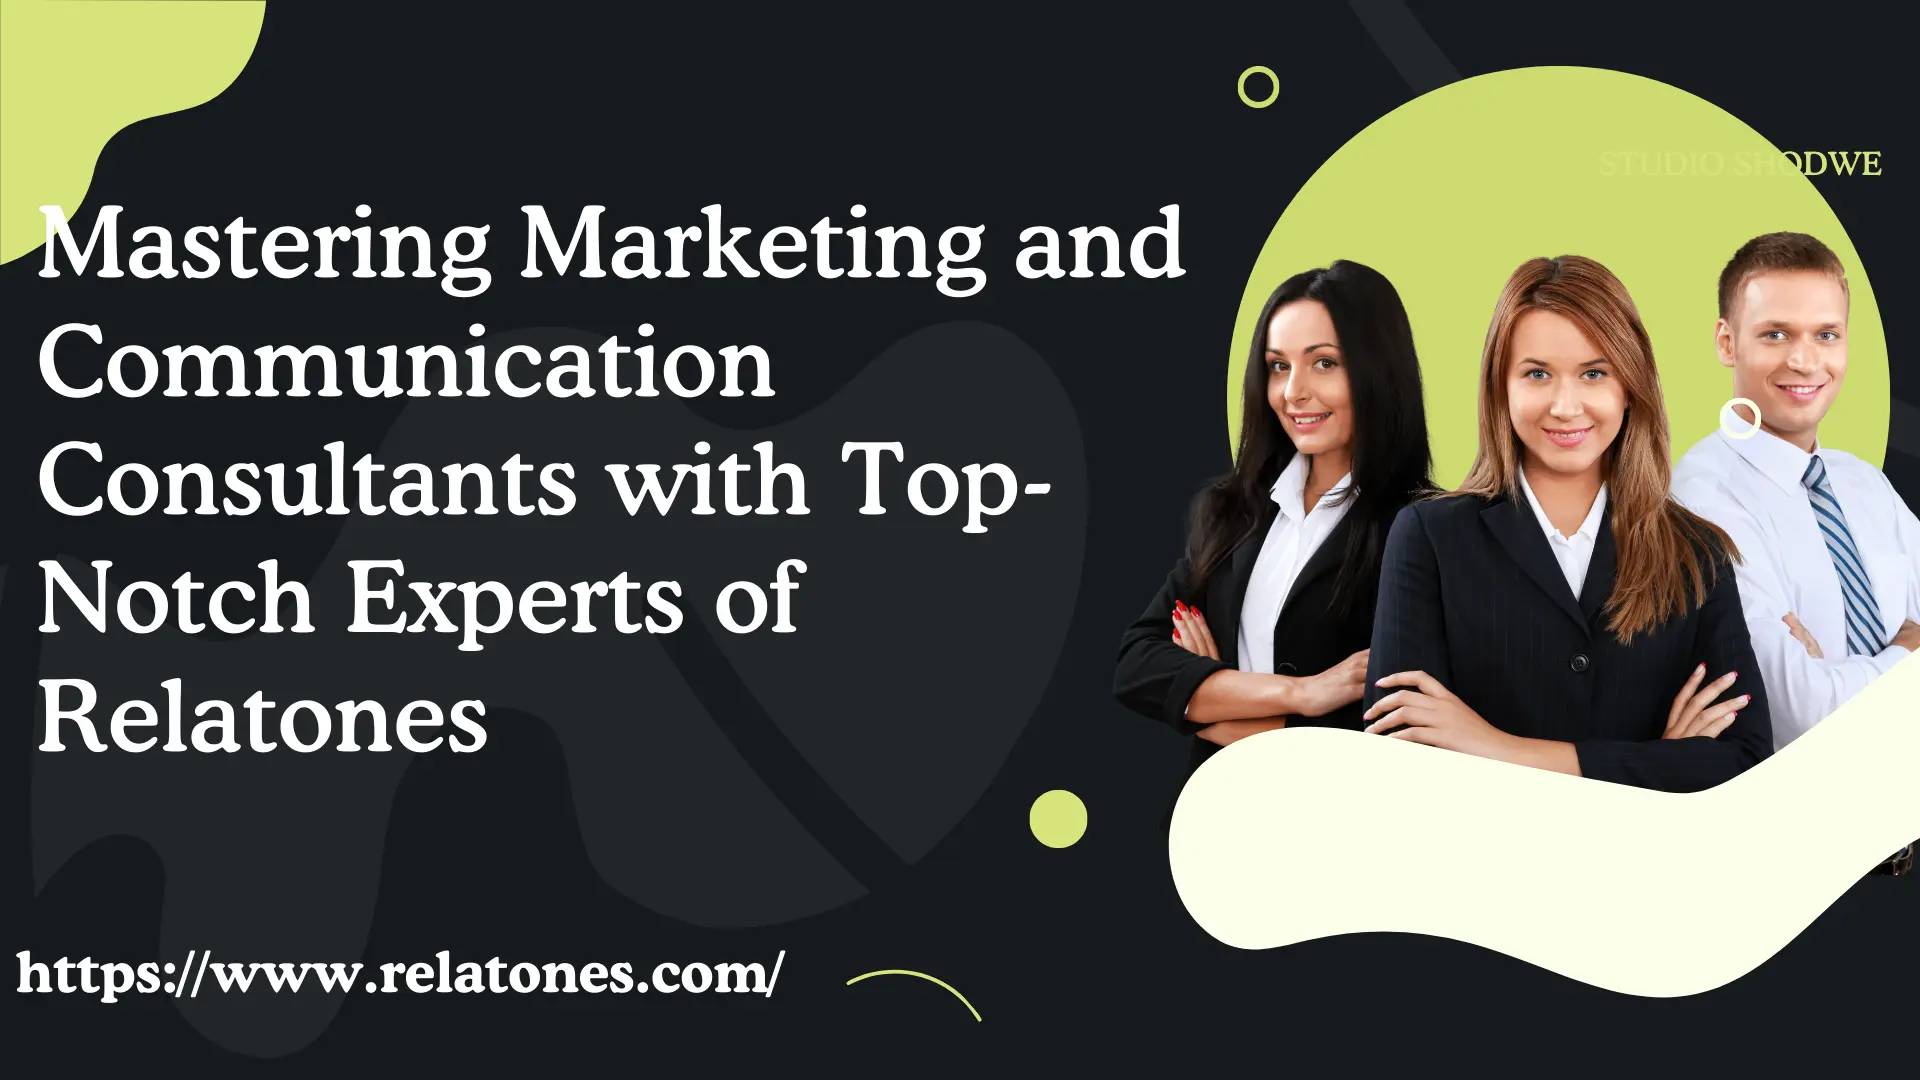 This iamge tells us about Mastering Marketing and Communication Consultants with Top-Notch Experts in 2024,relatones.com